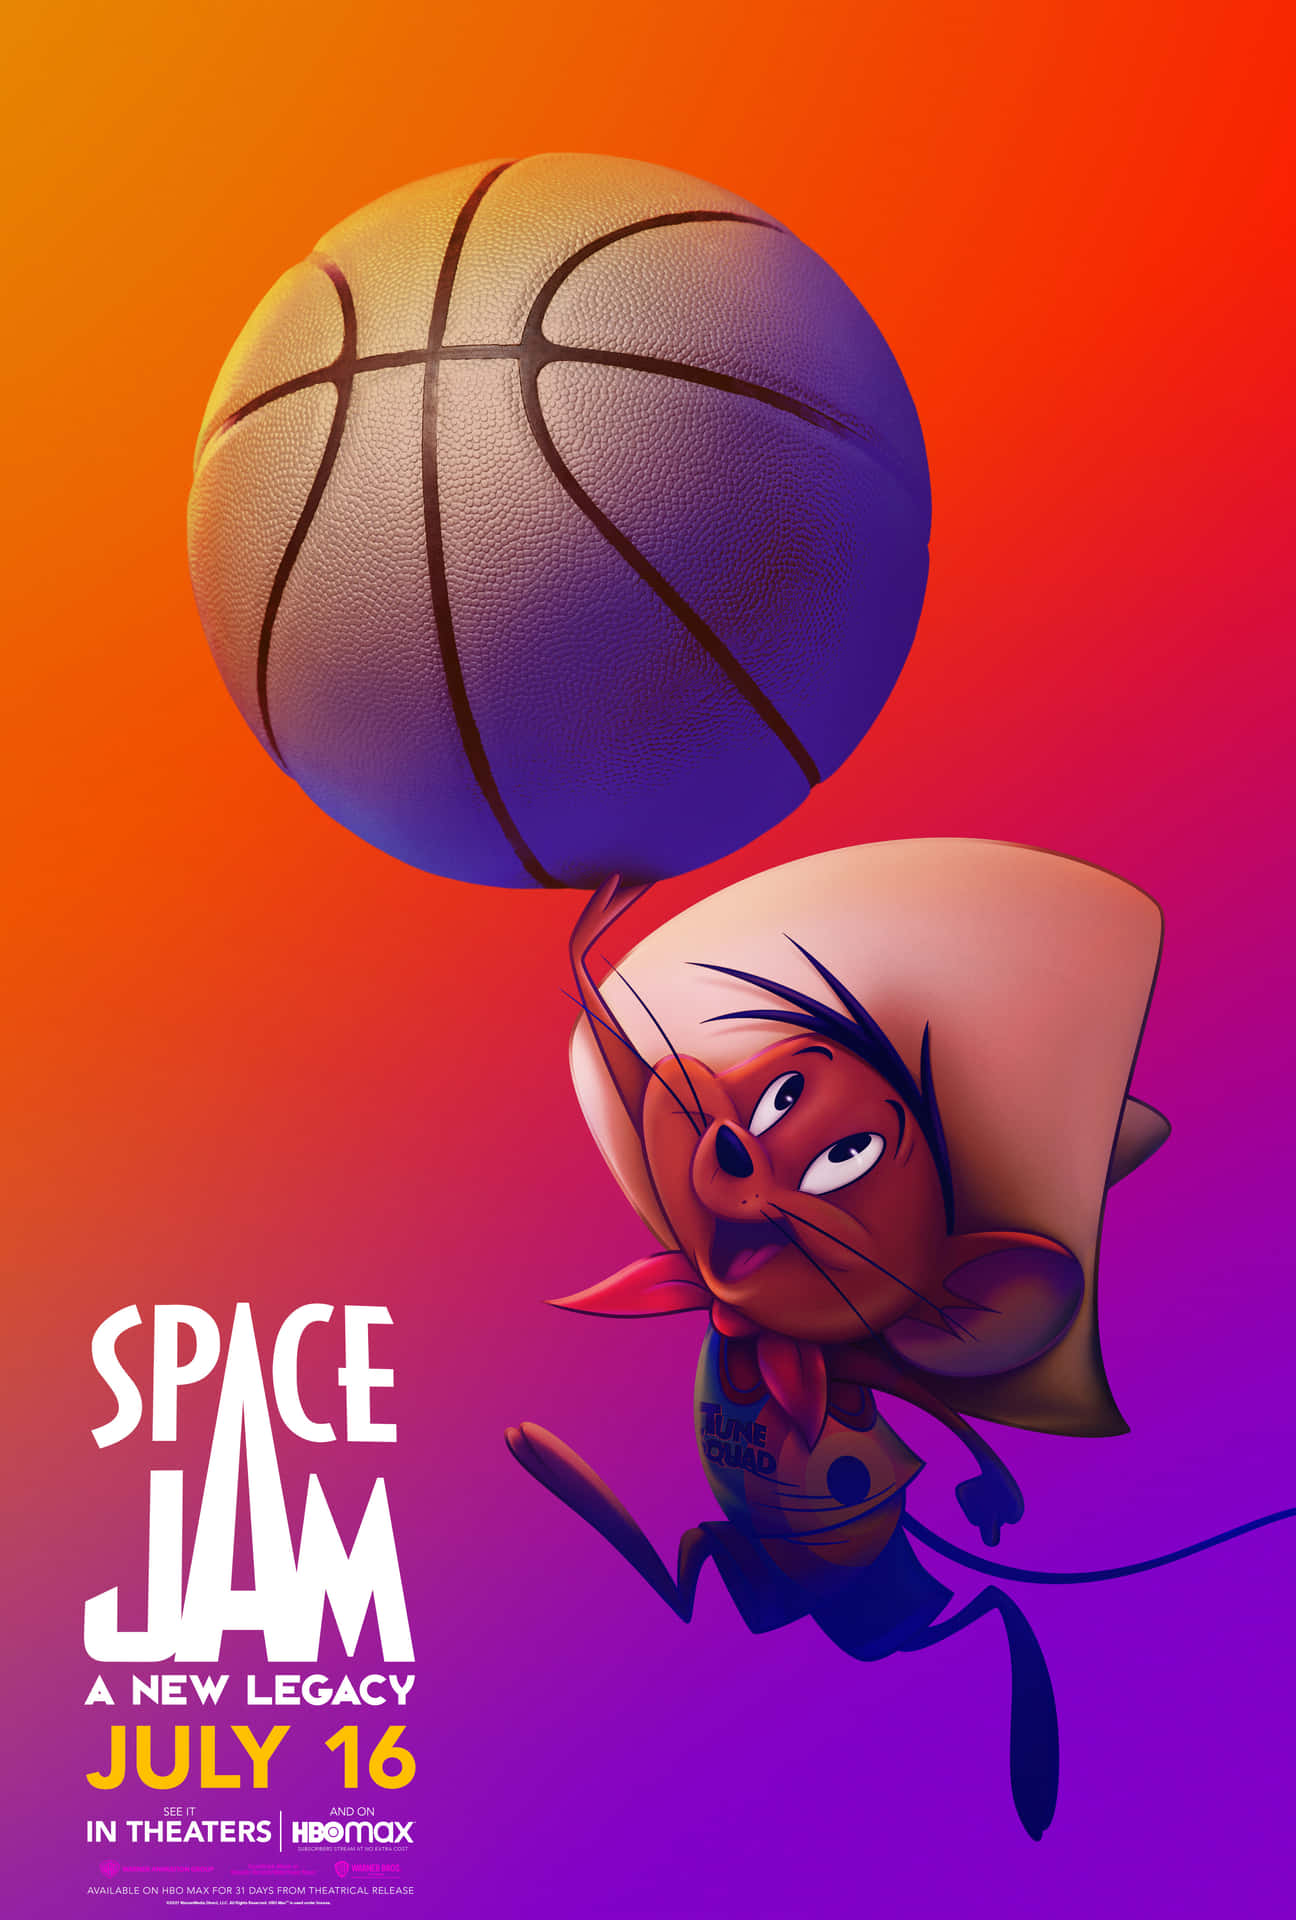 Lebron James And Looney Tunes Squad Positioned For Action In Space Jam - A New Legacy Wallpaper